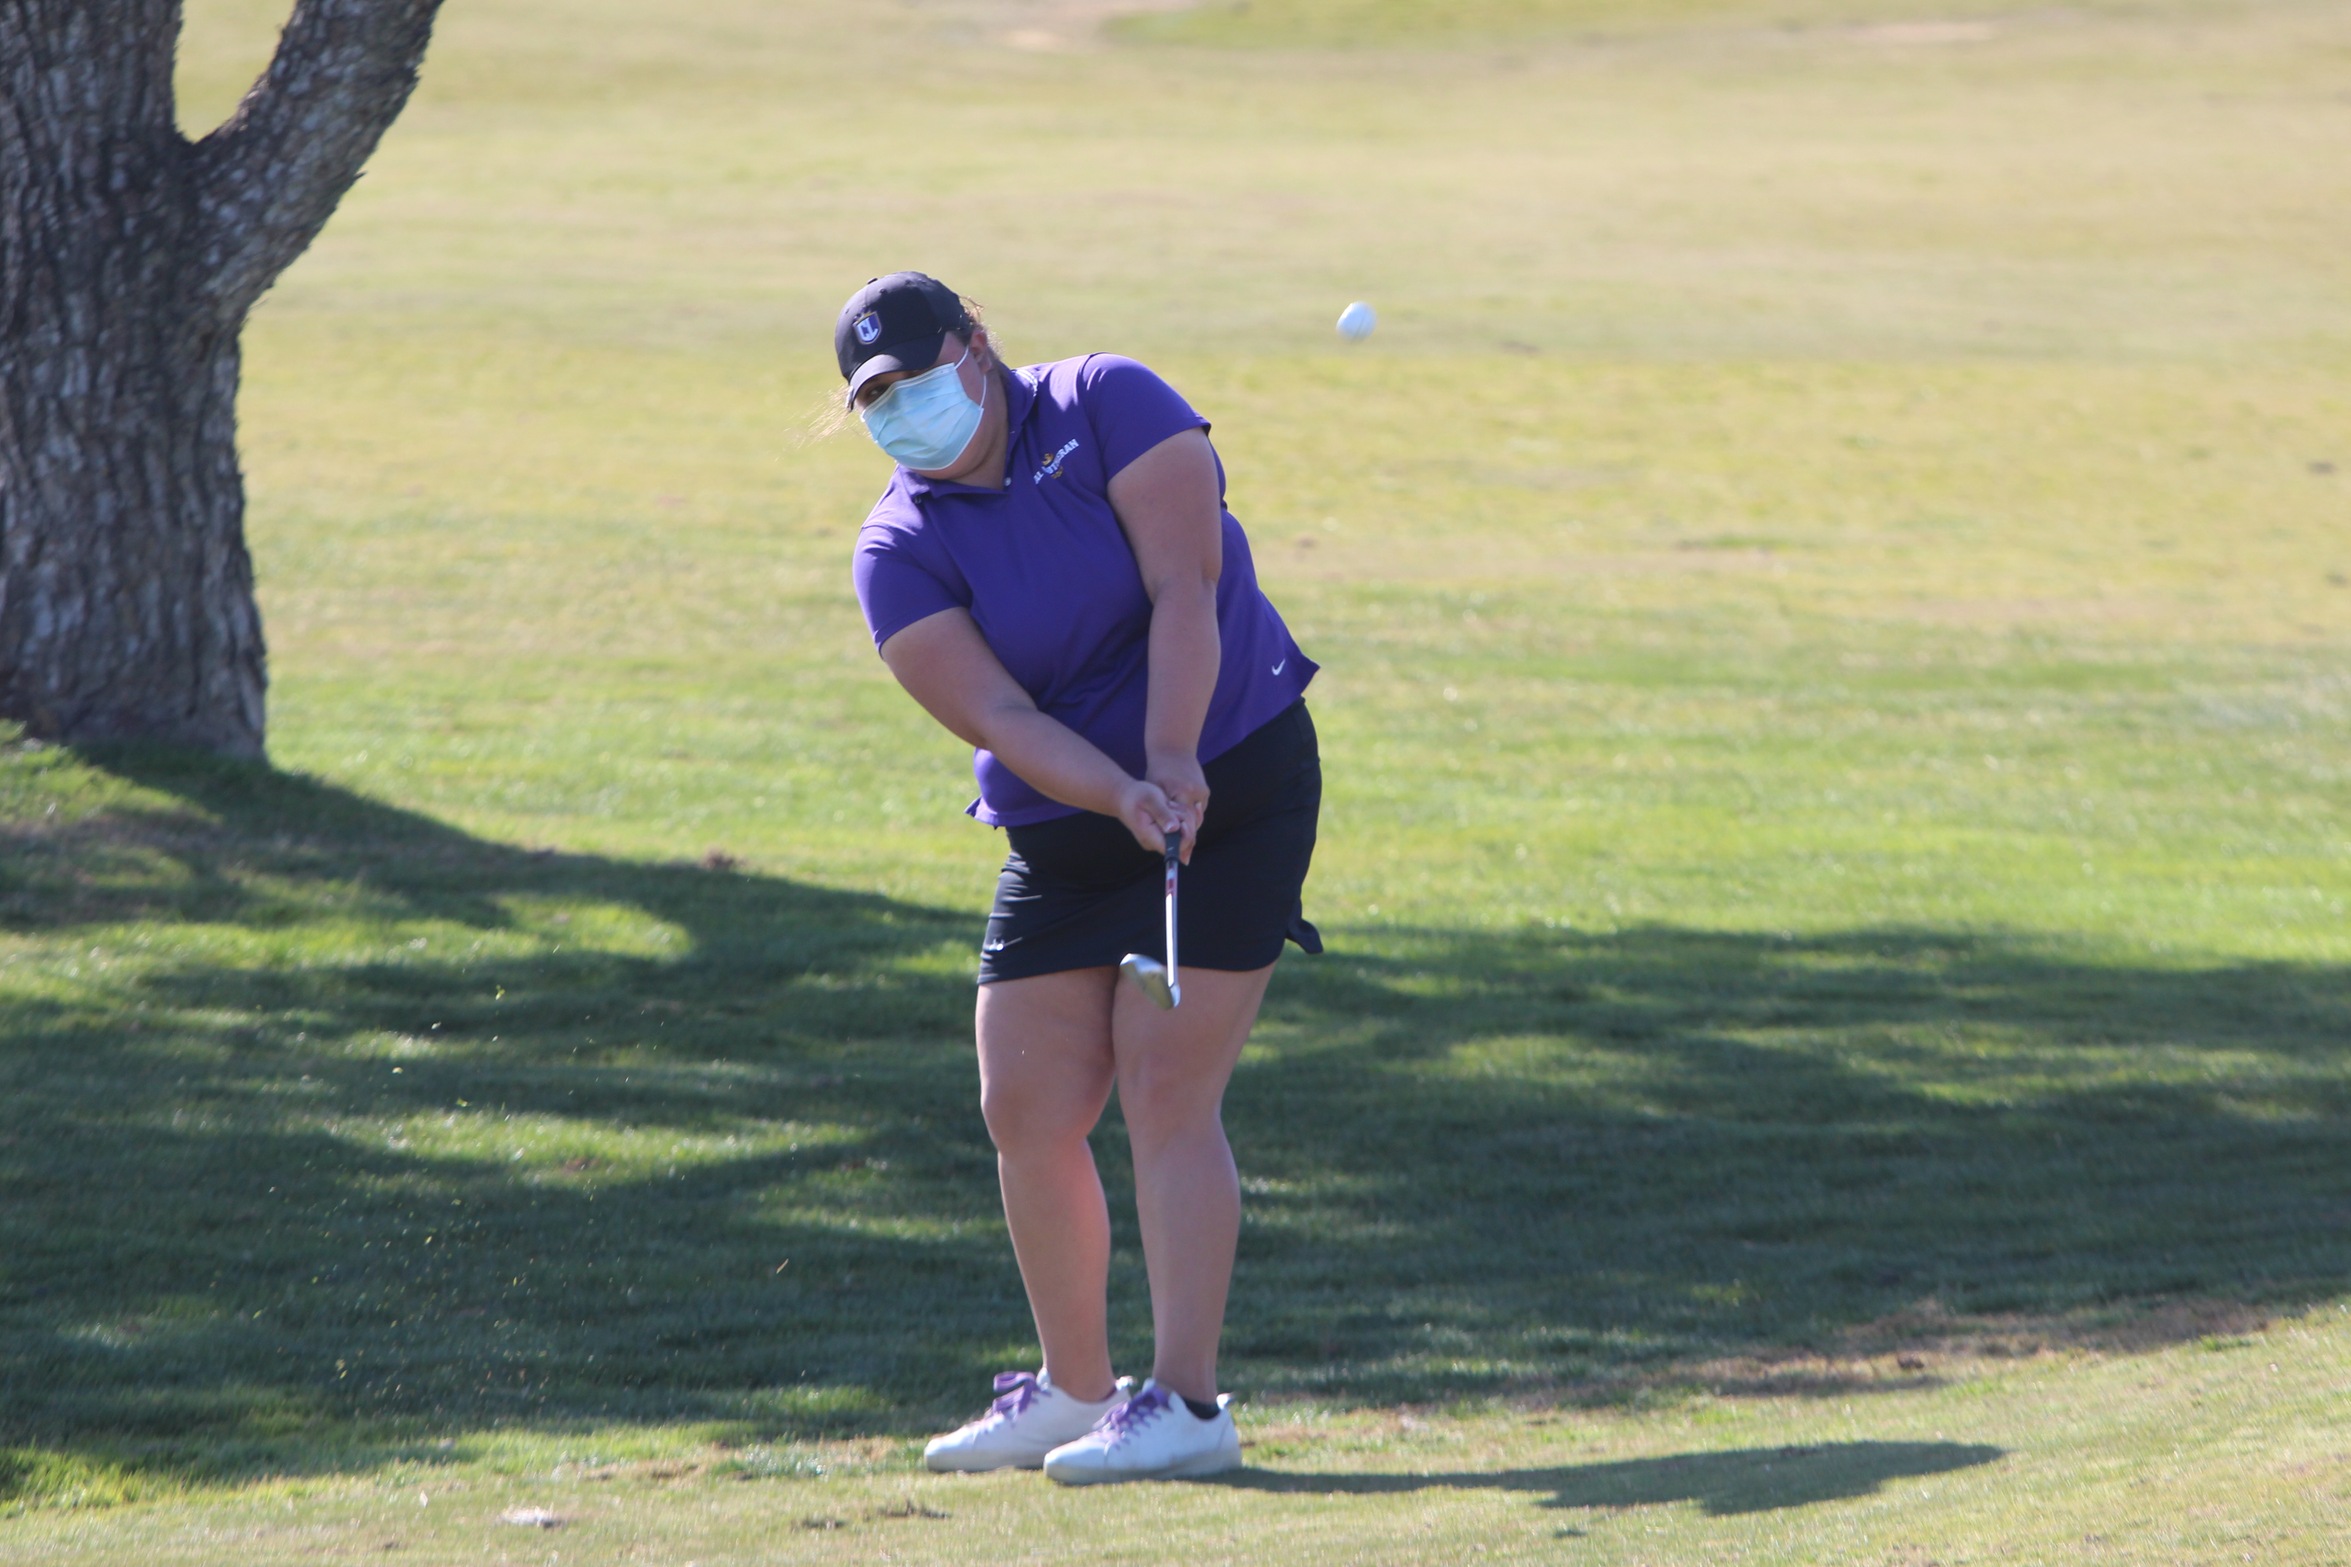 Grace Cornejo led the way for the Regals and tied for 7th at the SCIAC #1.